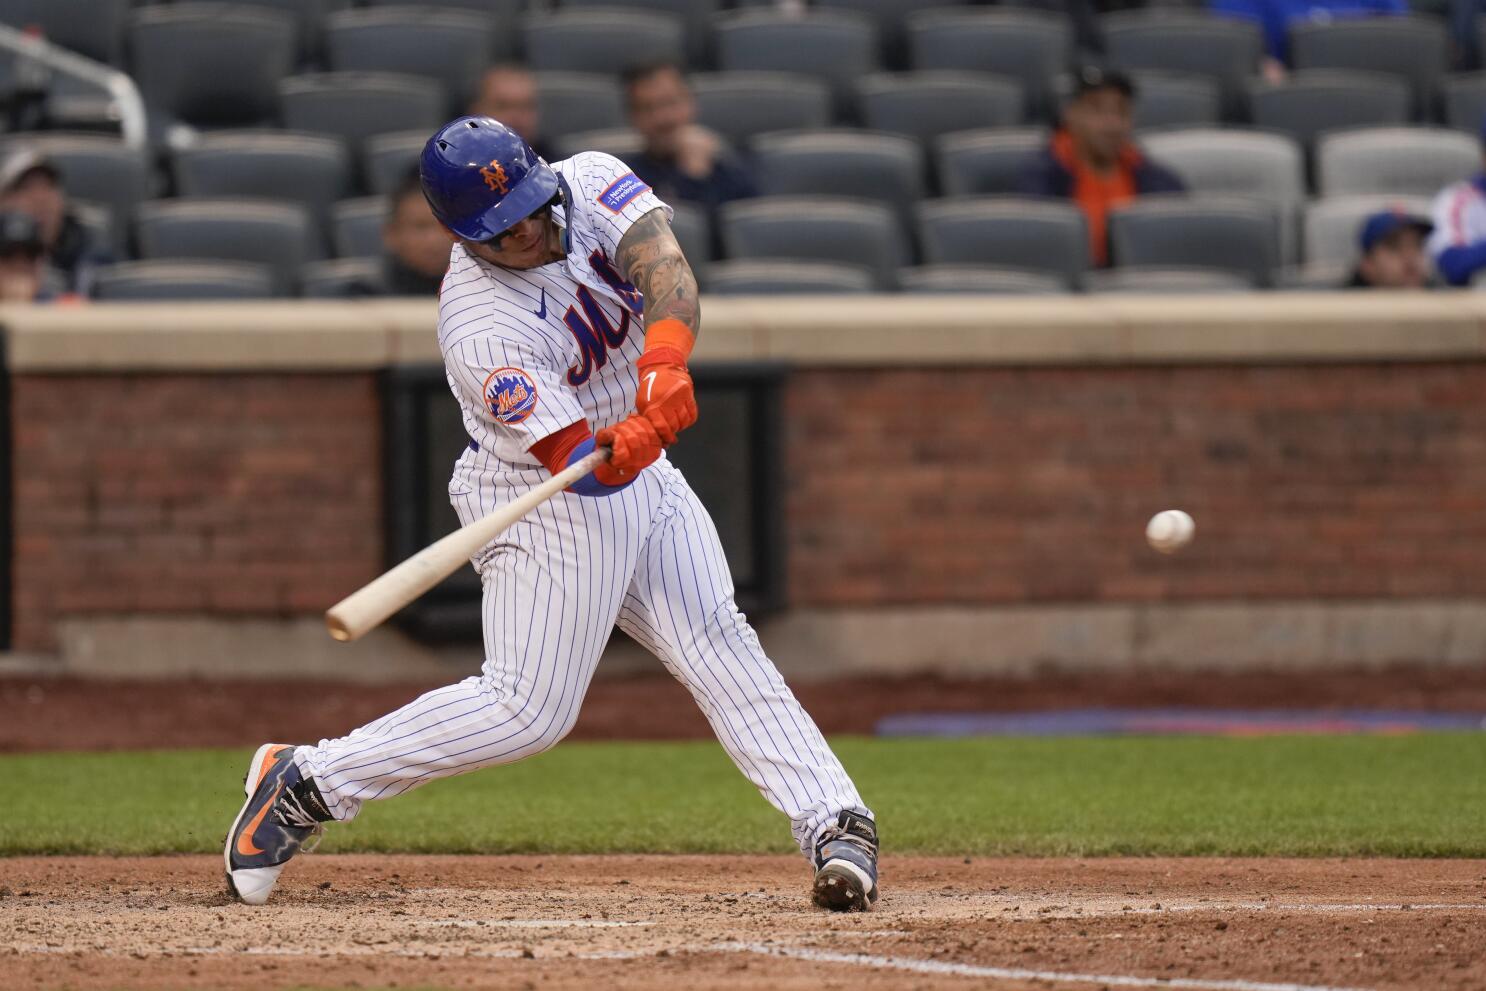 NY Mets lose to Atlanta Braves on Friday in extra innings